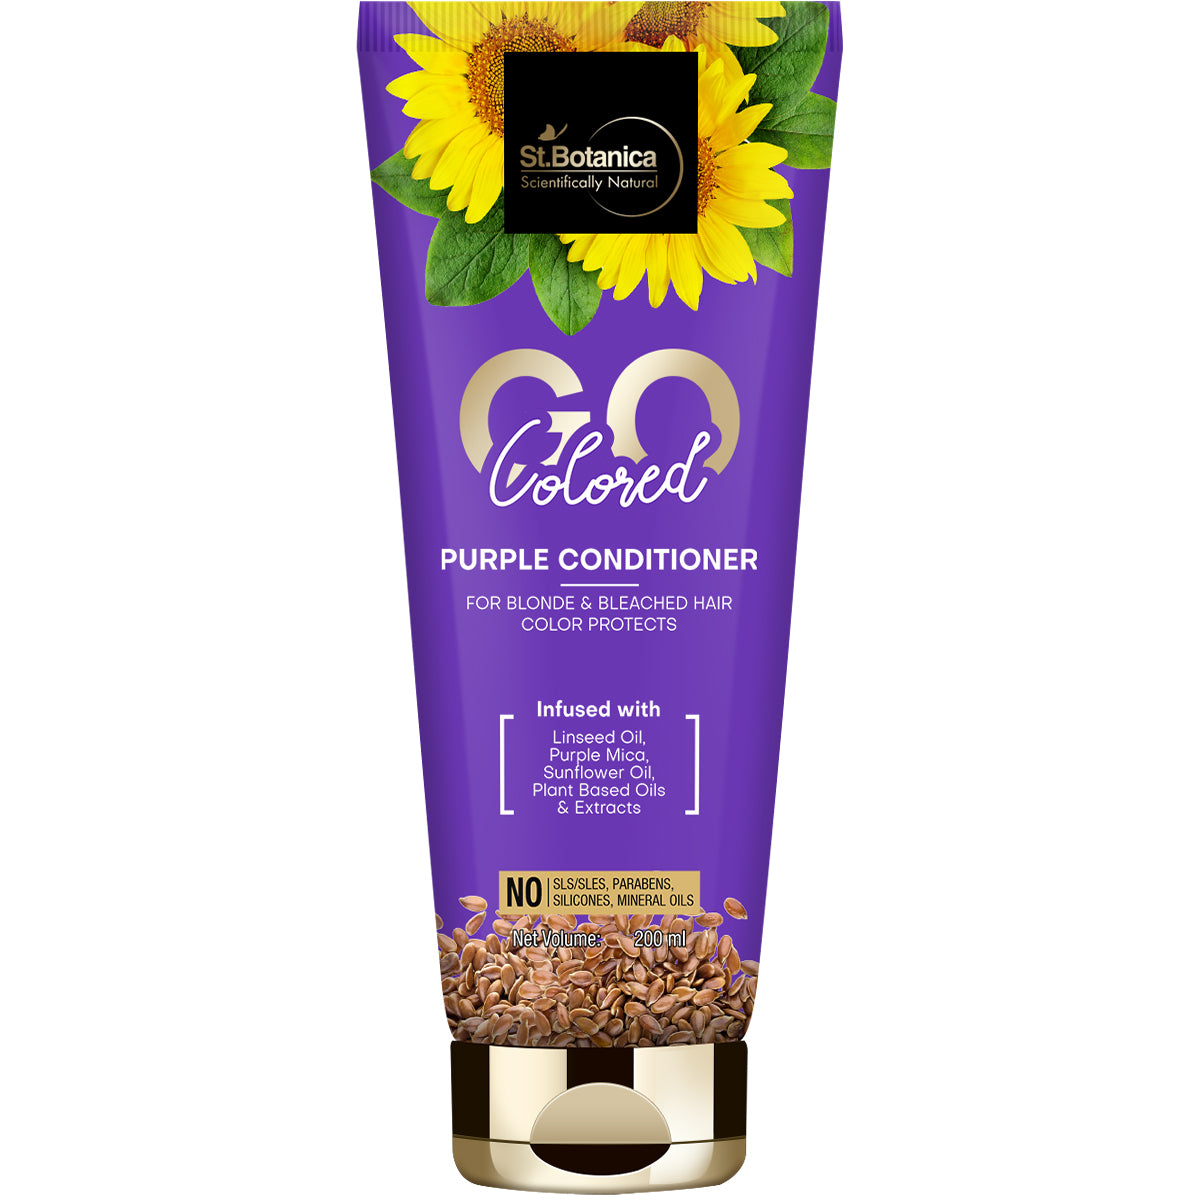 St.Botanica GO Colored Purple Hair Conditioner - With Linseed, Purple Mica, Sunflower Oil, No SLS/Sulphate, Paraben, Silicones, Colors, 200ml